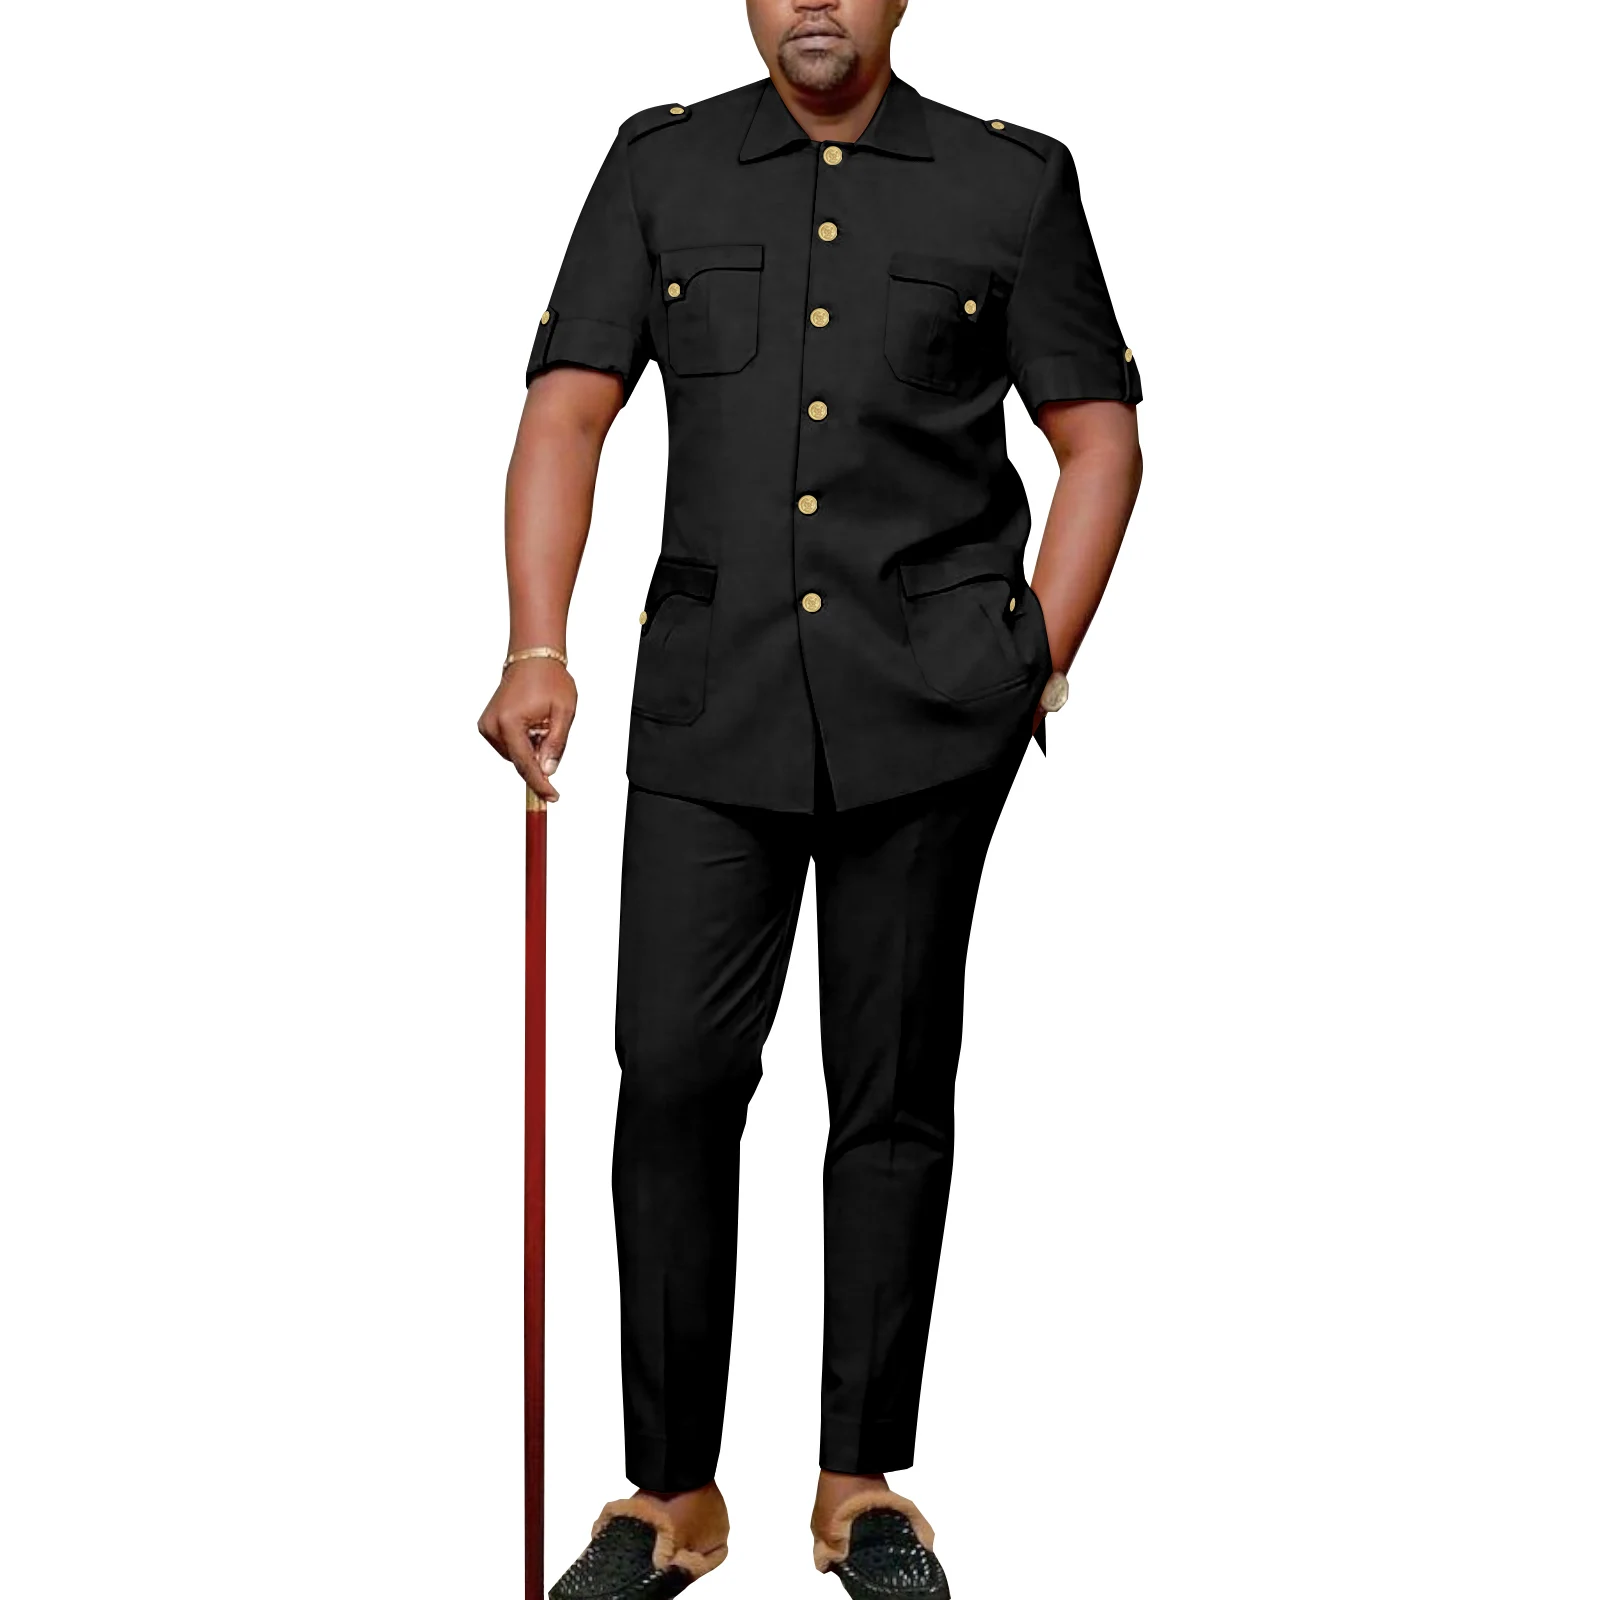 African African Men's Suit Short-Sleeved Single-Breasted Shirt Full-Length Pants 2-Piece Casual Party Formal Wear A2216166